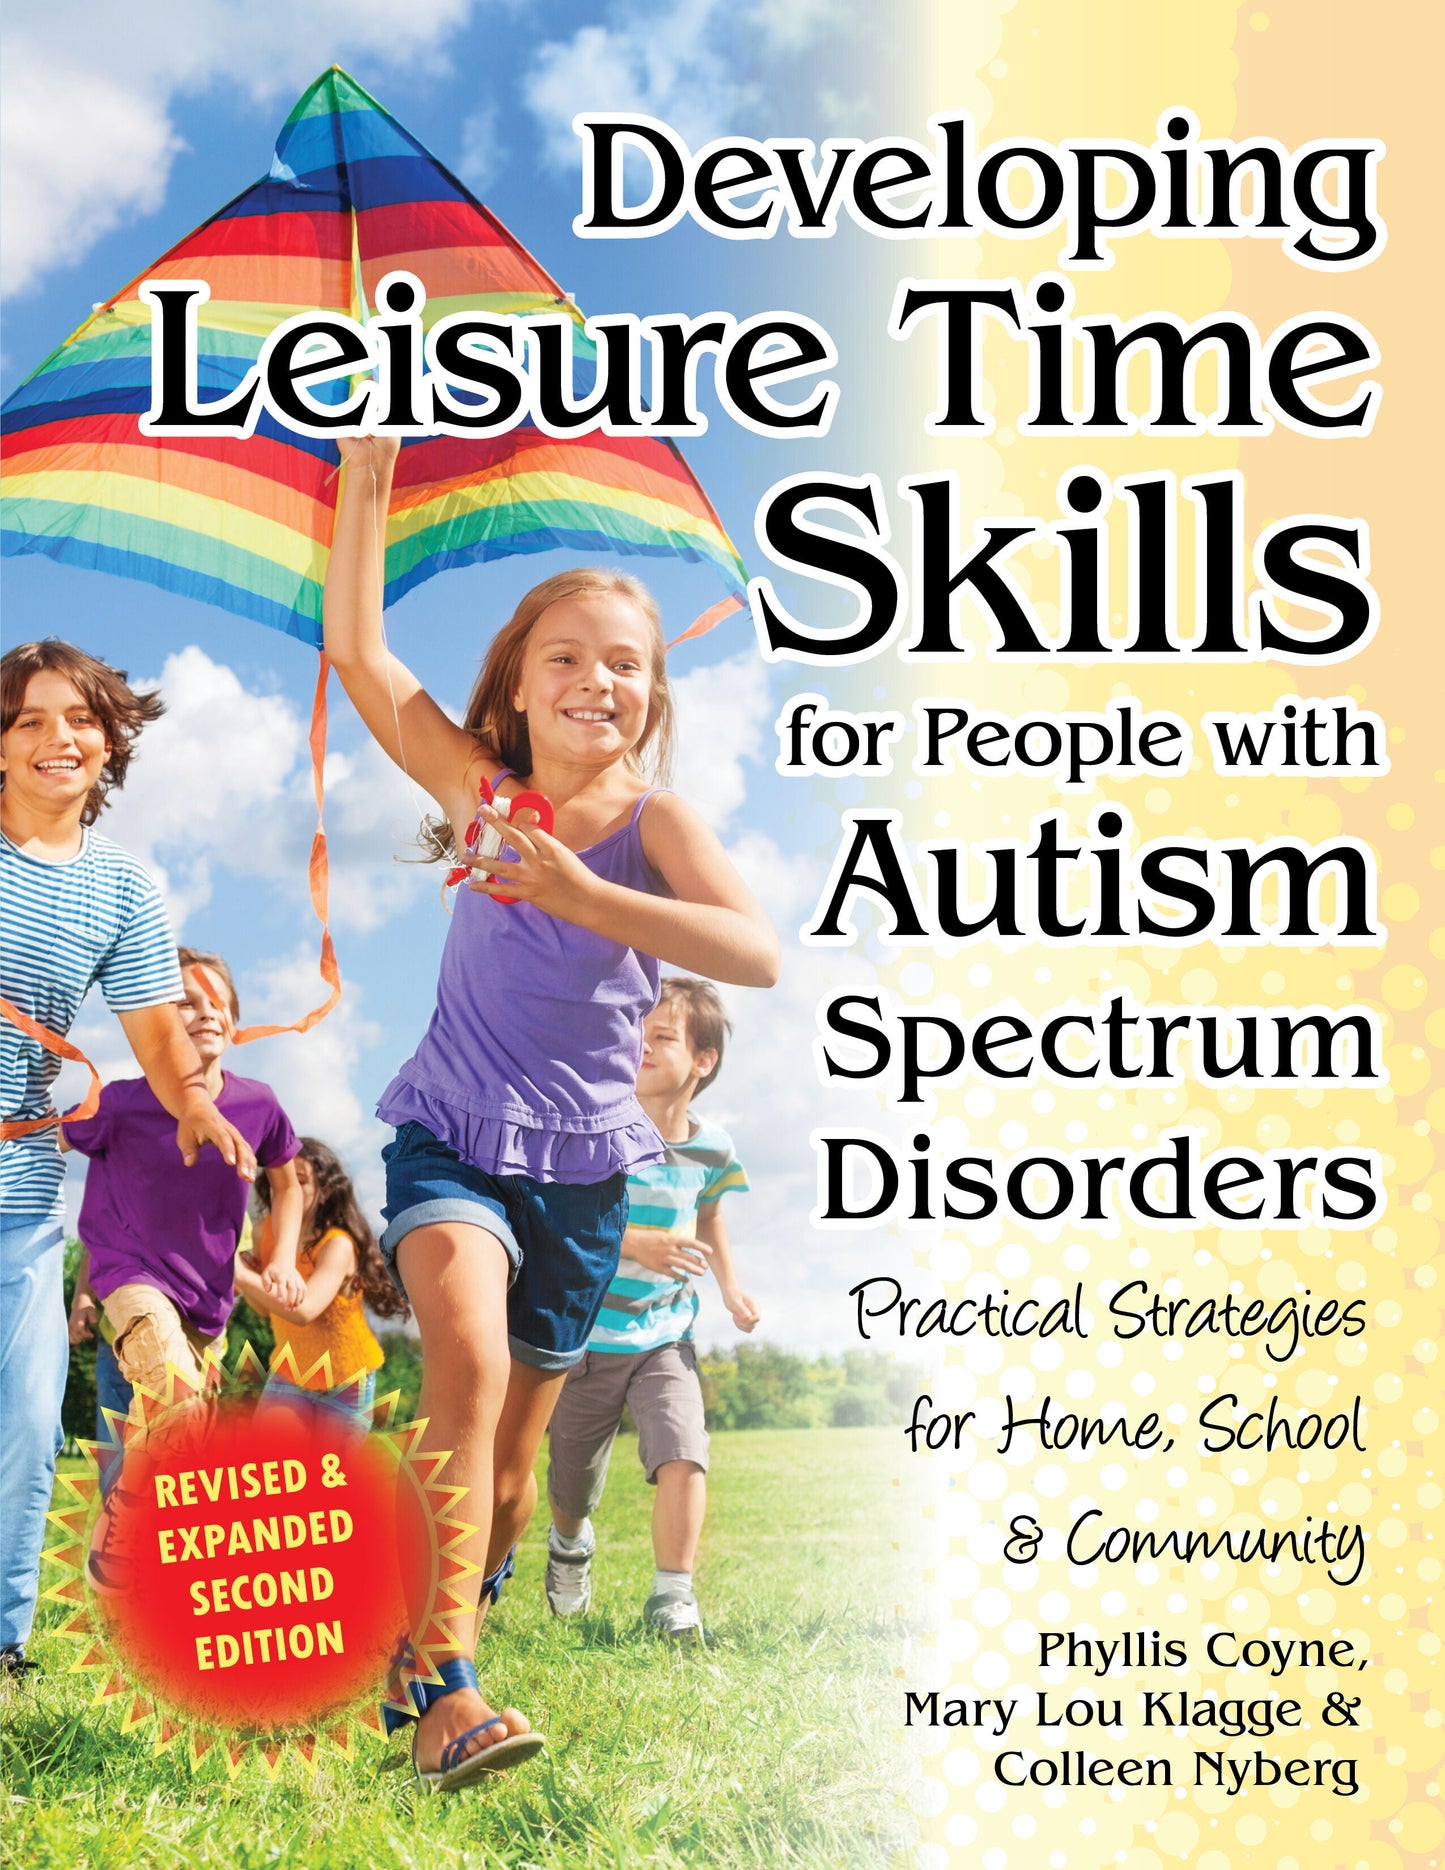 Developing Leisure Time Skills for People with Autism Spectrum Disorders: Revised and Expanded  -  Phyllis Coyne, Colleen Nyberg and Mary Lou Klagge